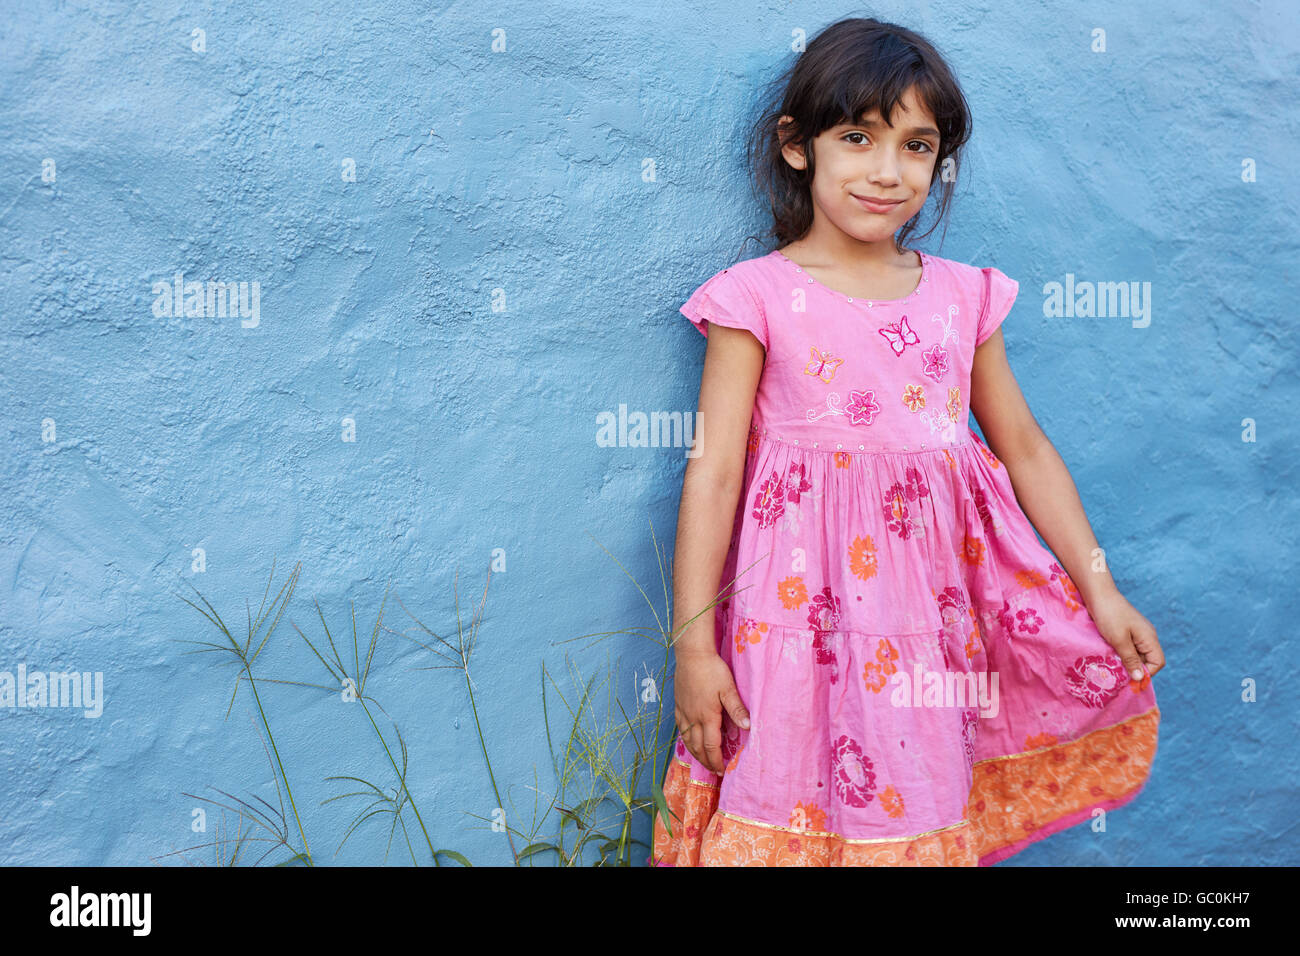 Shot of cute little girl in beautiful pink dress looking at camera while standing against blue wall. Stock Photo